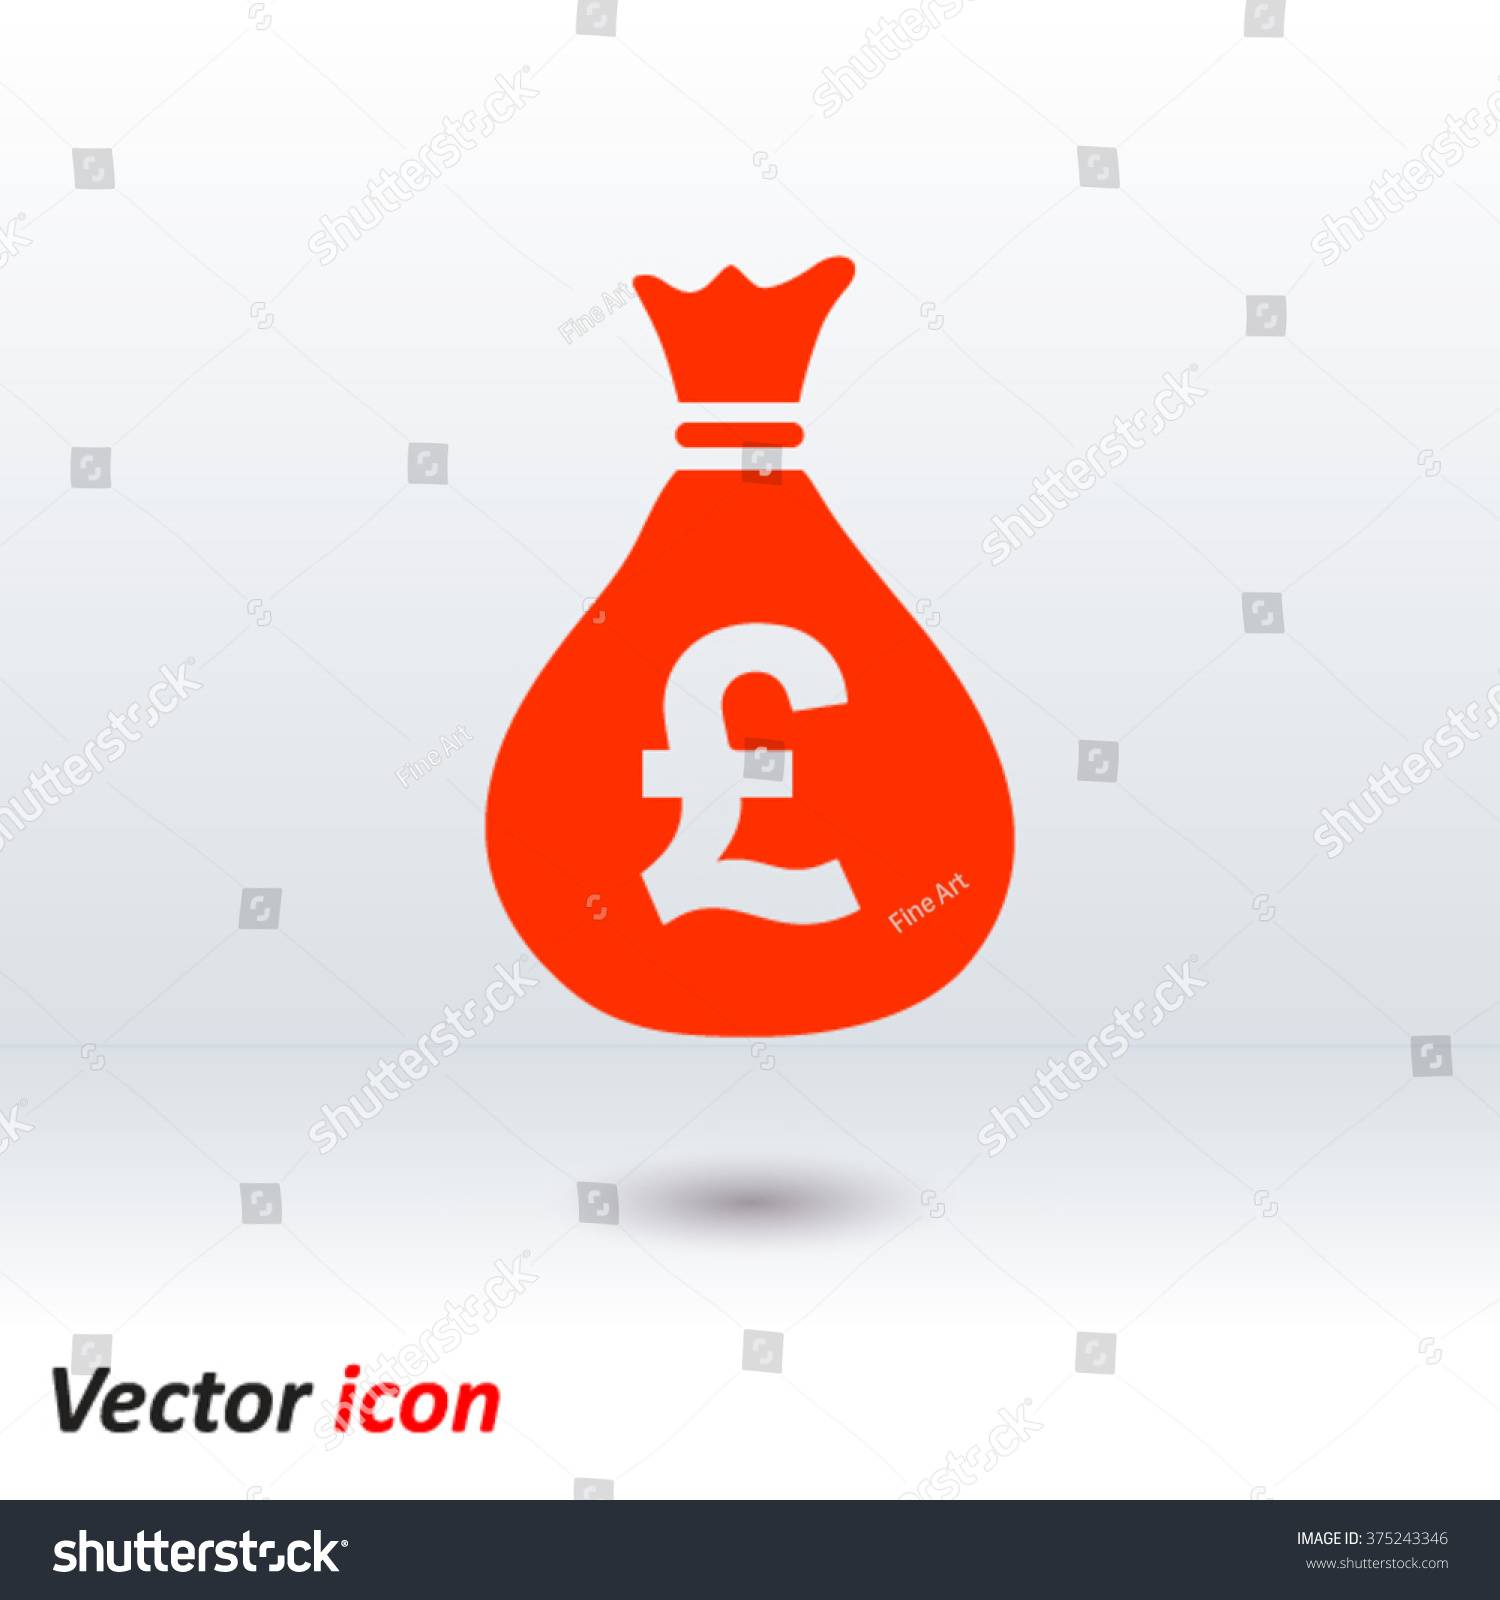 Money Bag Icon Pound Gbp Currency Stock Vector Royalty Free - 